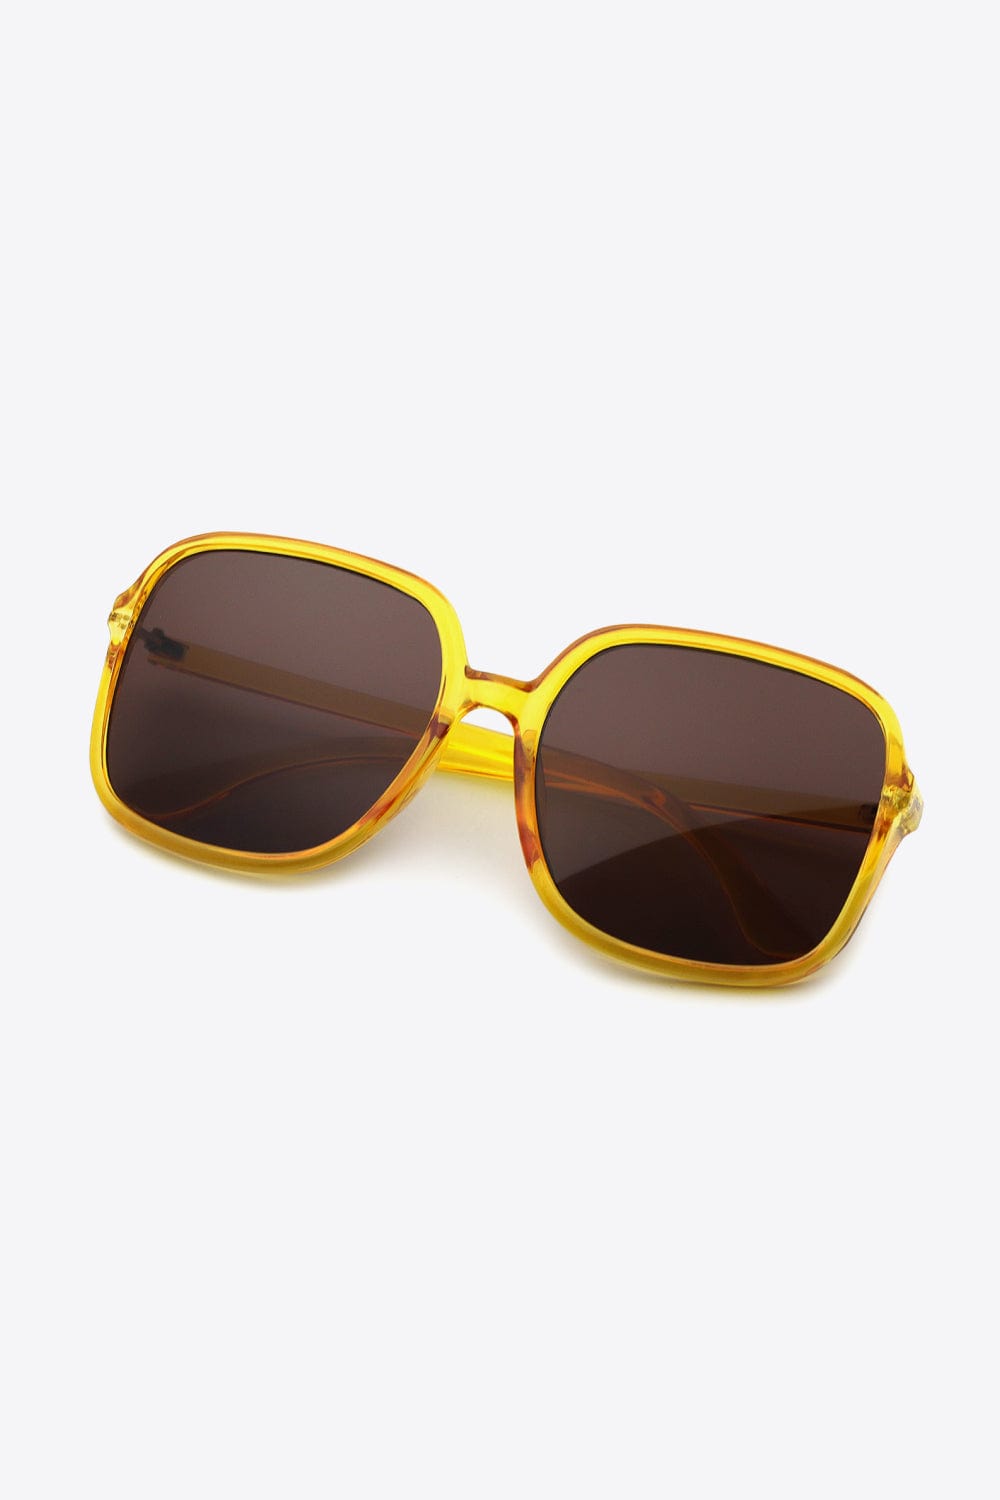 The802Gypsy sunglasses Canary Yellow / One Size GYPSY-Polycarbonate Square Sunglasses